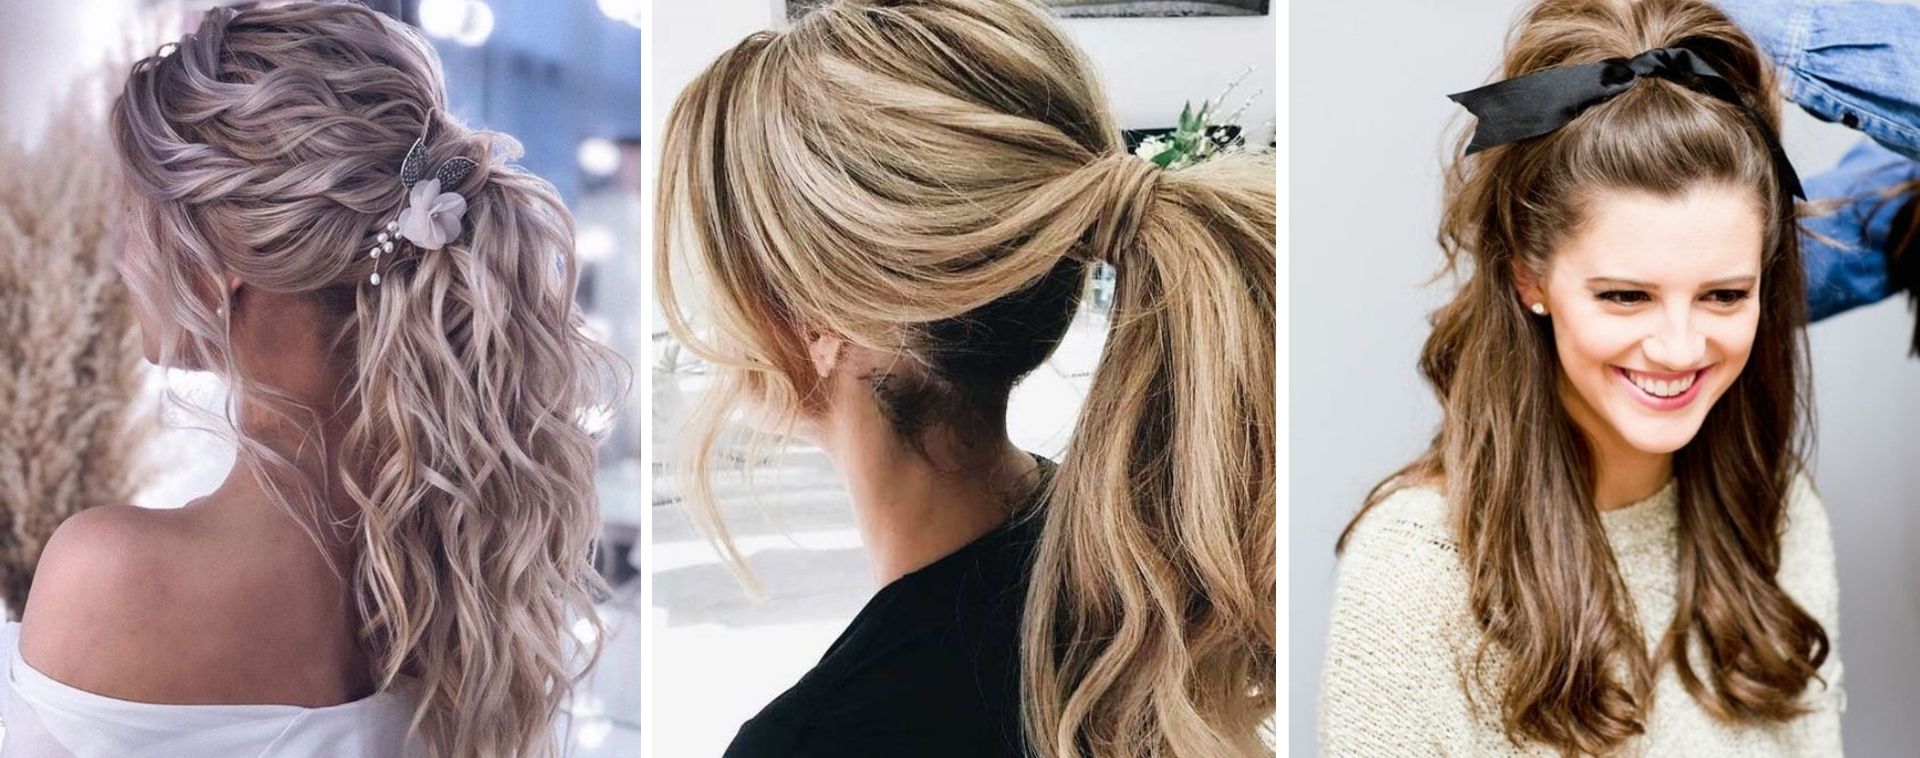 42 Updo Hairstyles Perfect For Any Occassion